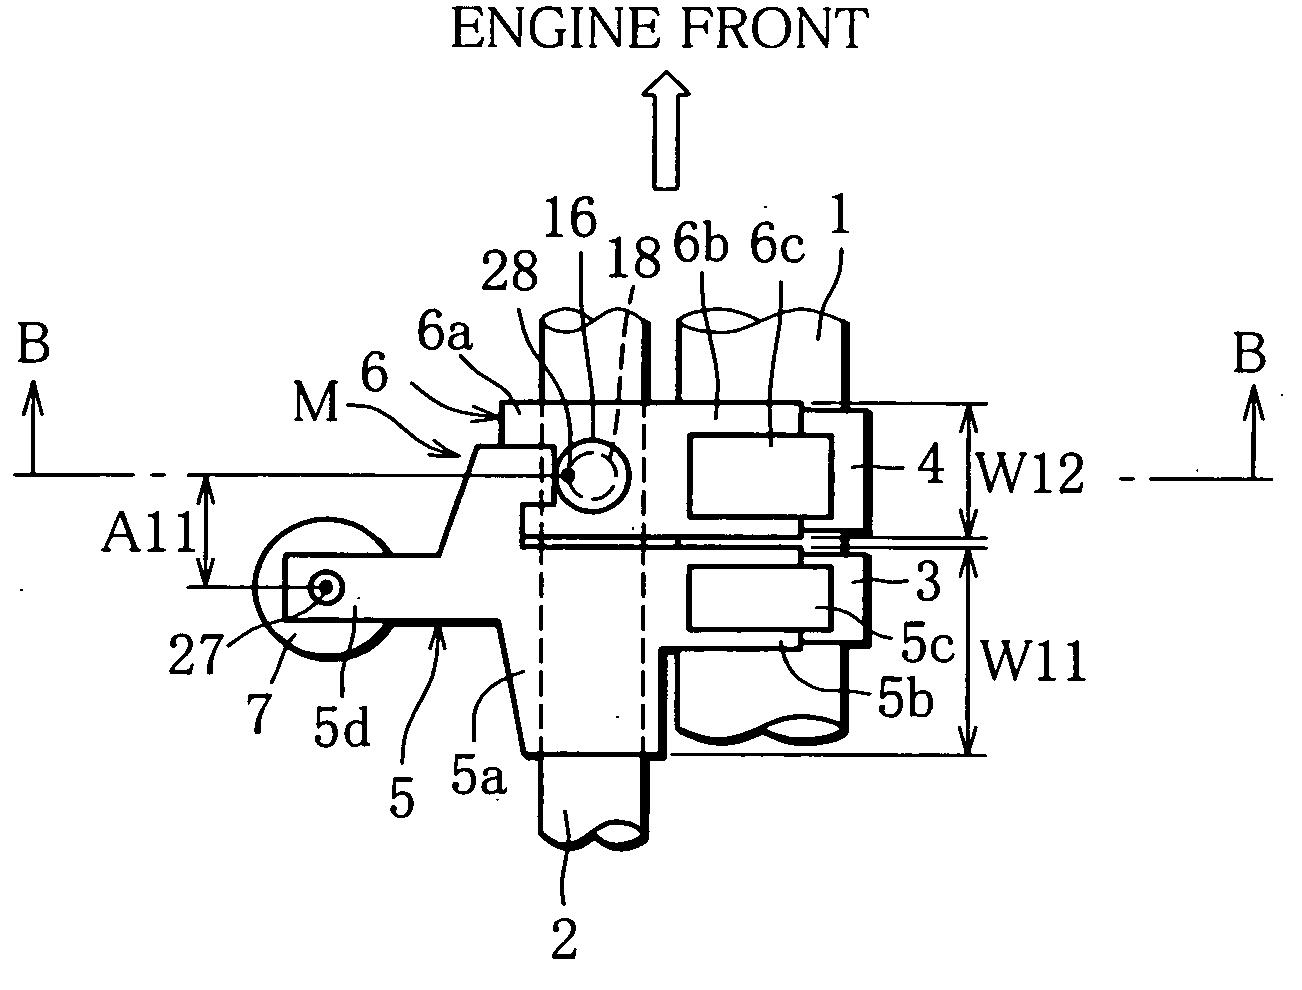 Variable valve train apparatus for an internal combustion engine